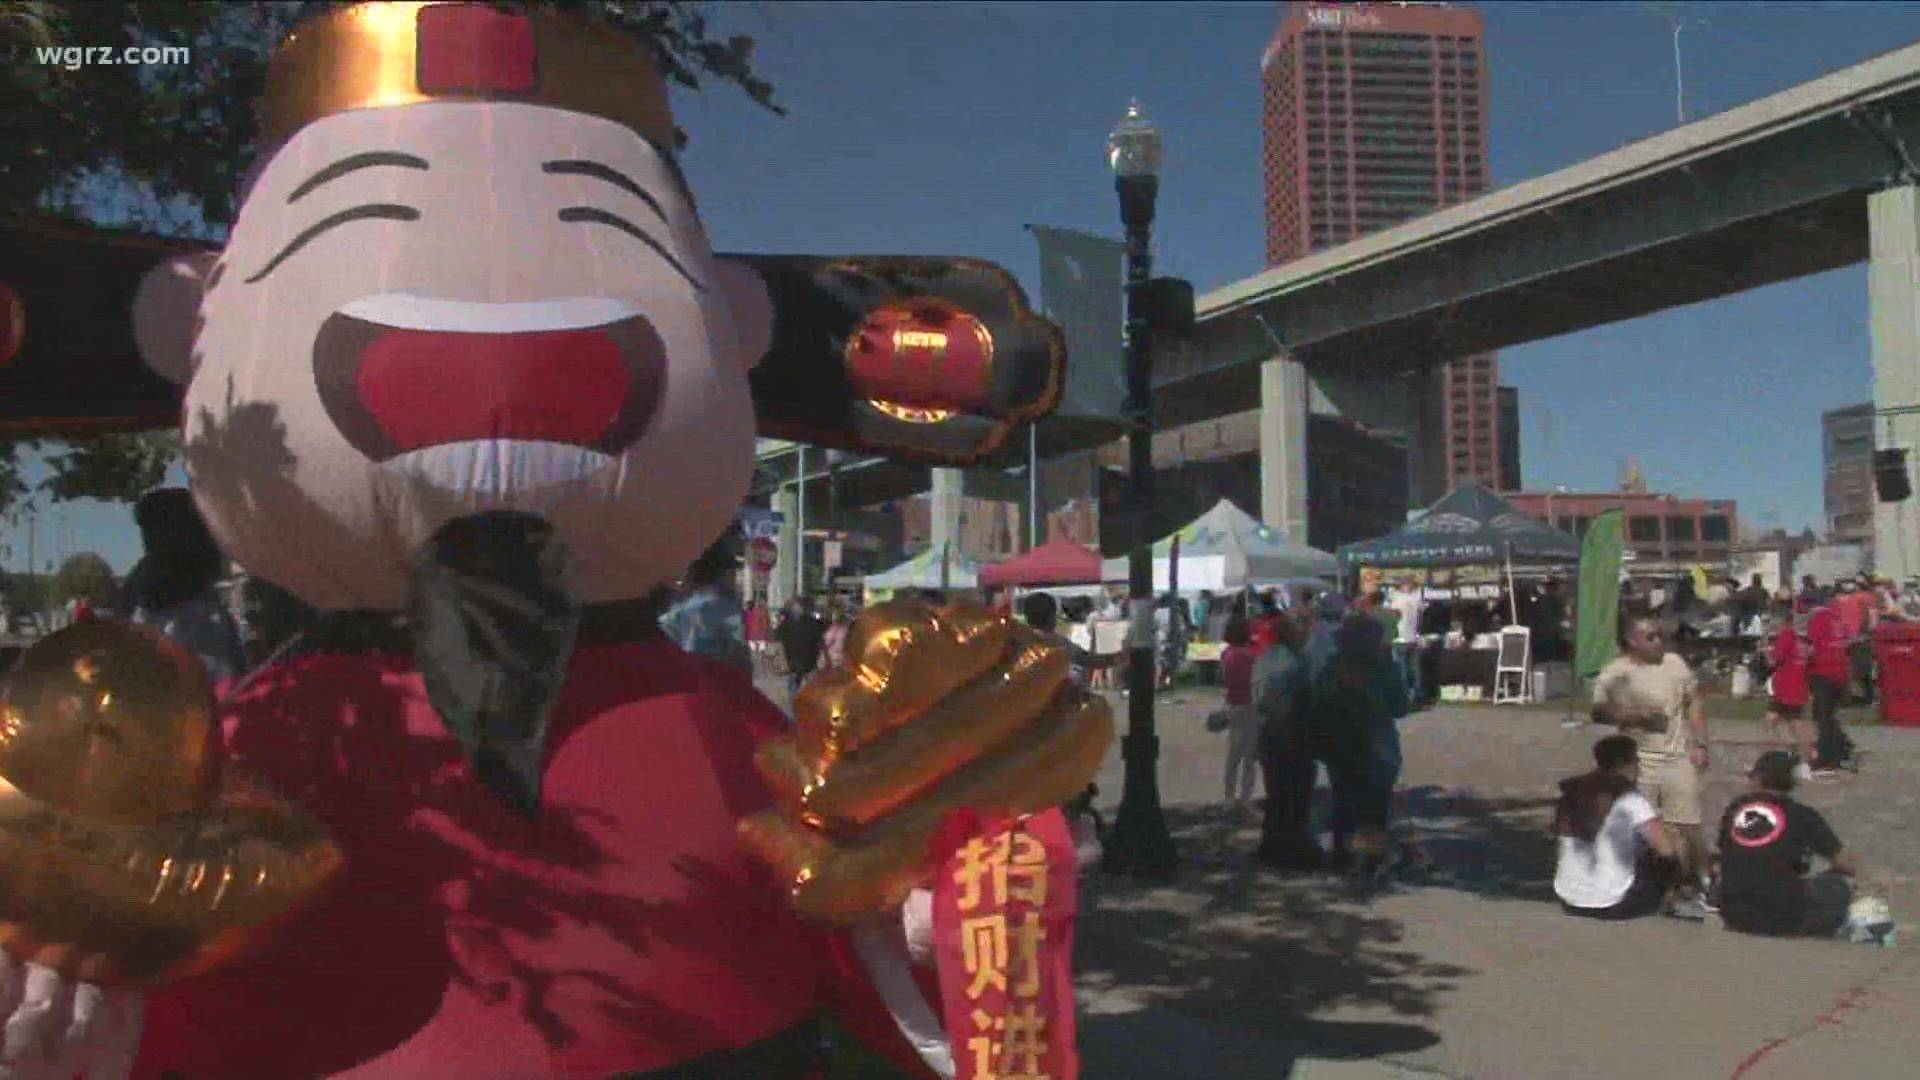 Western New York Chinese Chamber of Commerce hosted its annual festival on Sunday.